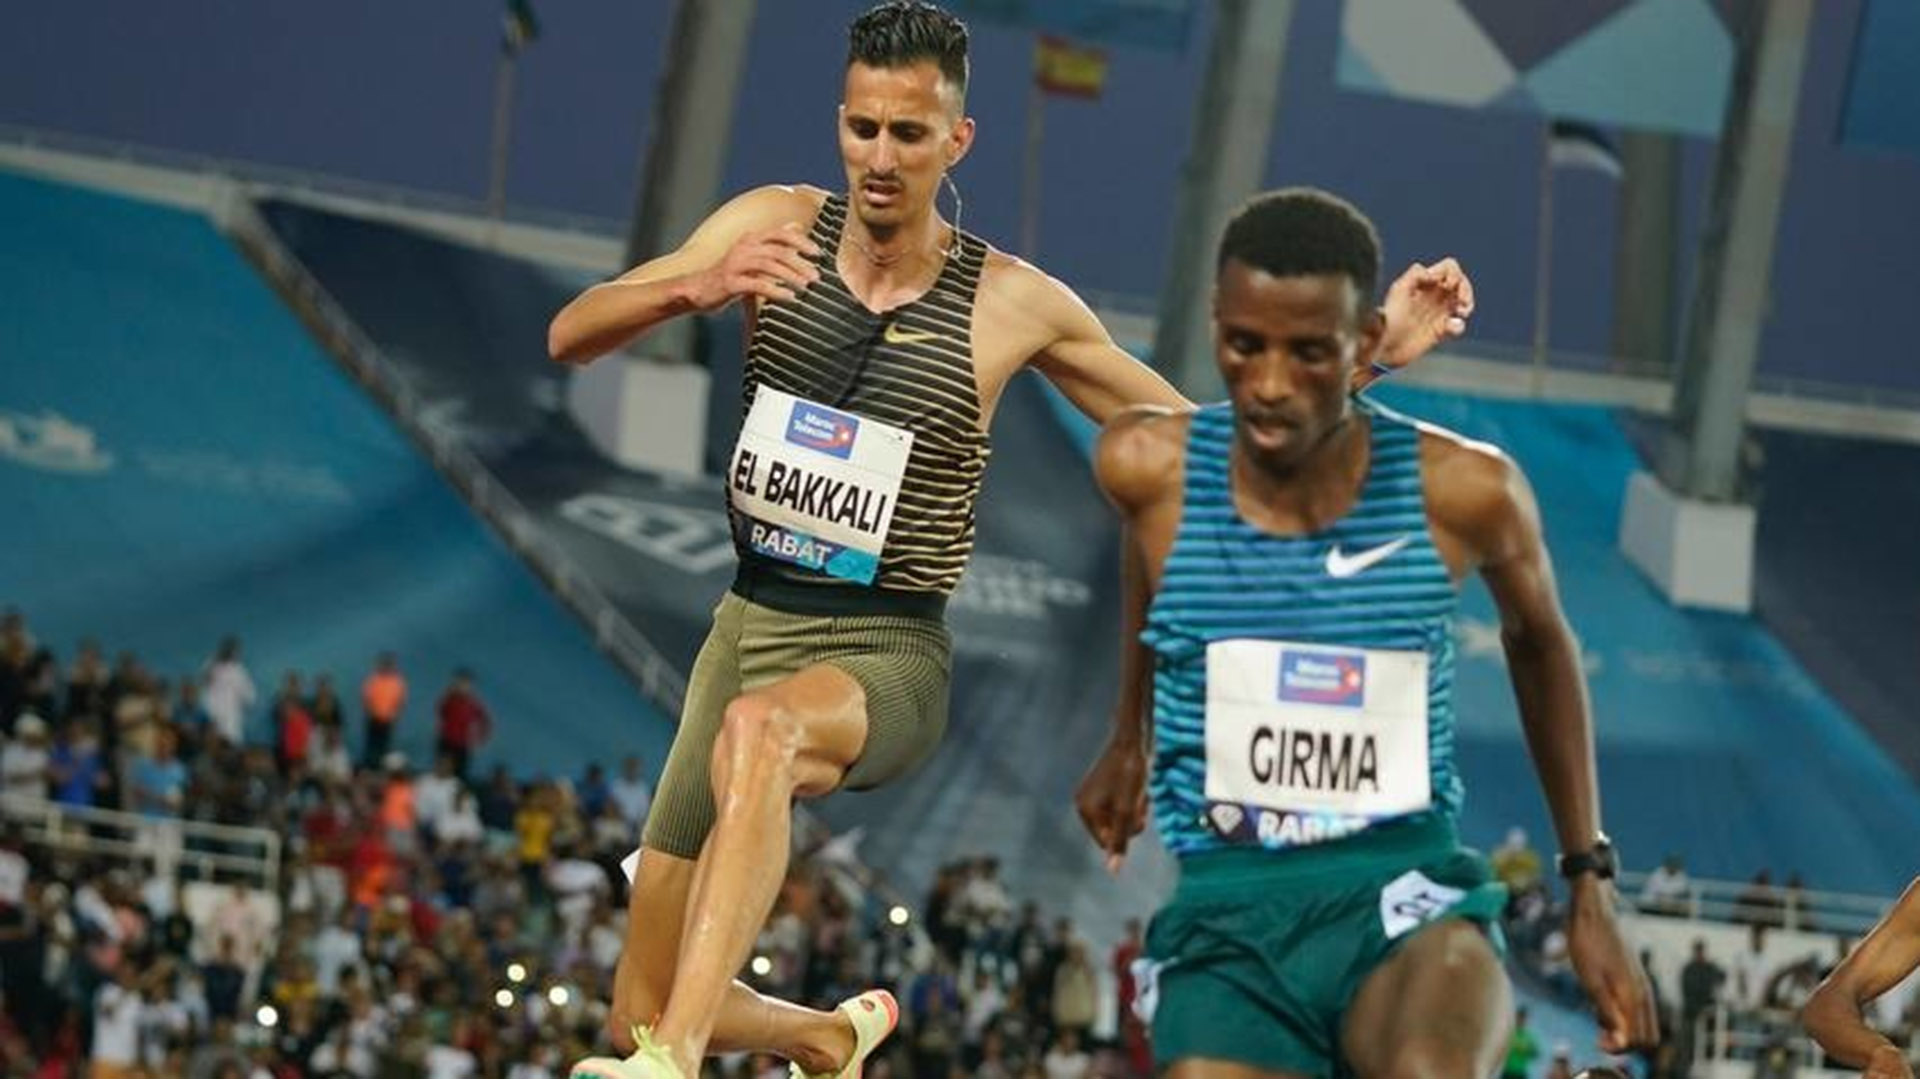 Moroccan Olympic steeplechase champion El Bakkali dazzles in front of home crowd in Rabat